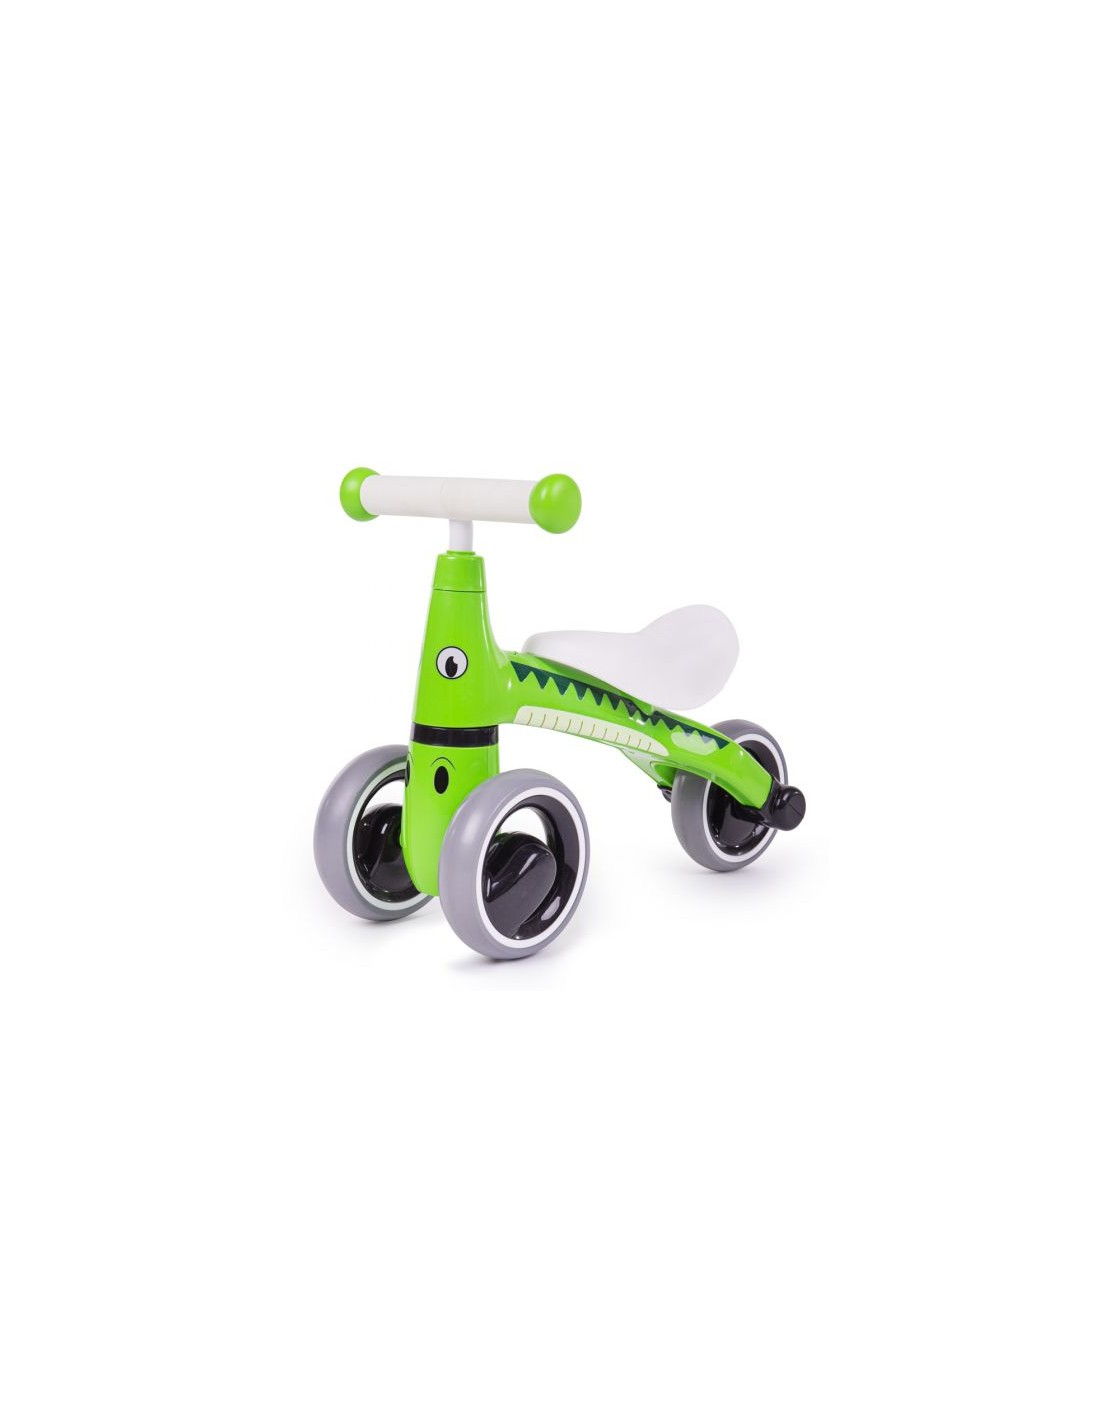 Didicar Diditrike - Early Stage Ride On Toy Pedal Free Crocodile